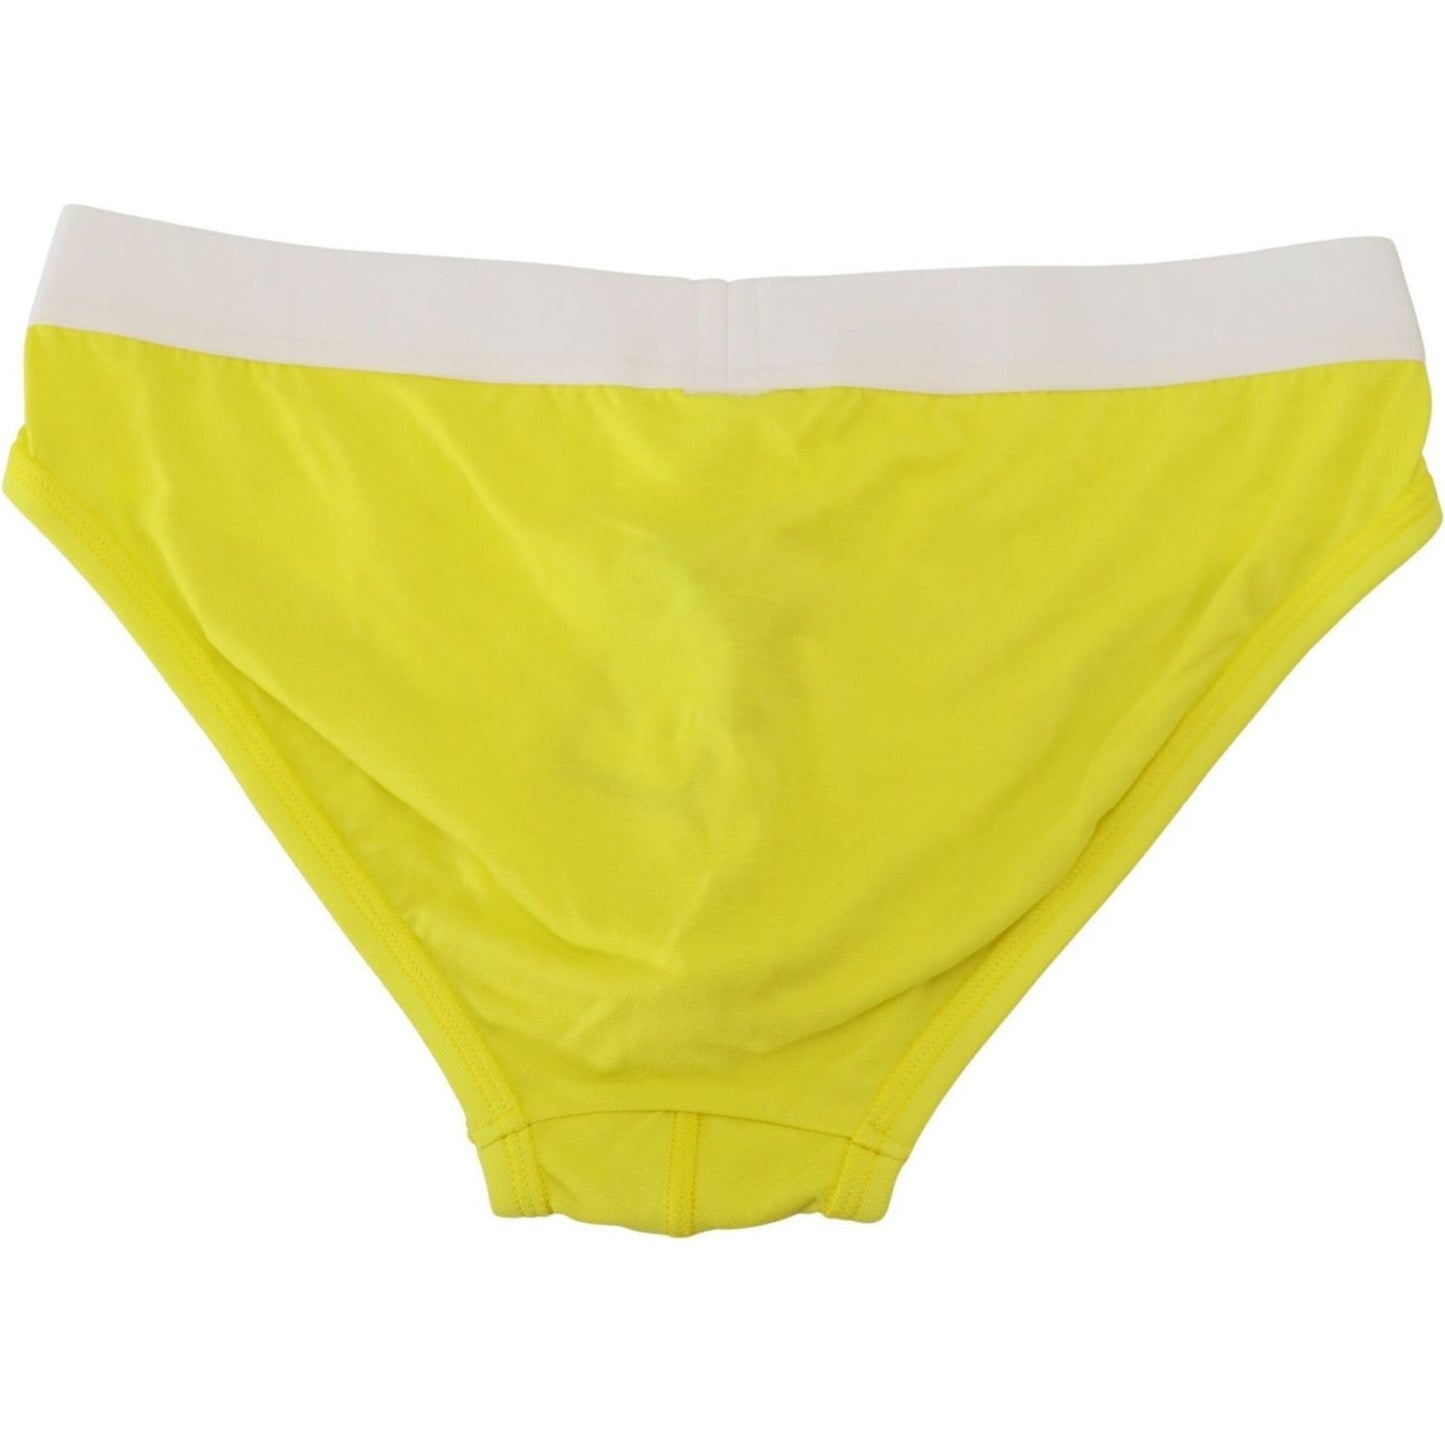 Dsquared² Chic Yellow Modal Stretch Men's Briefs yellow-white-logo-modal-stretch-men-brief-underwear